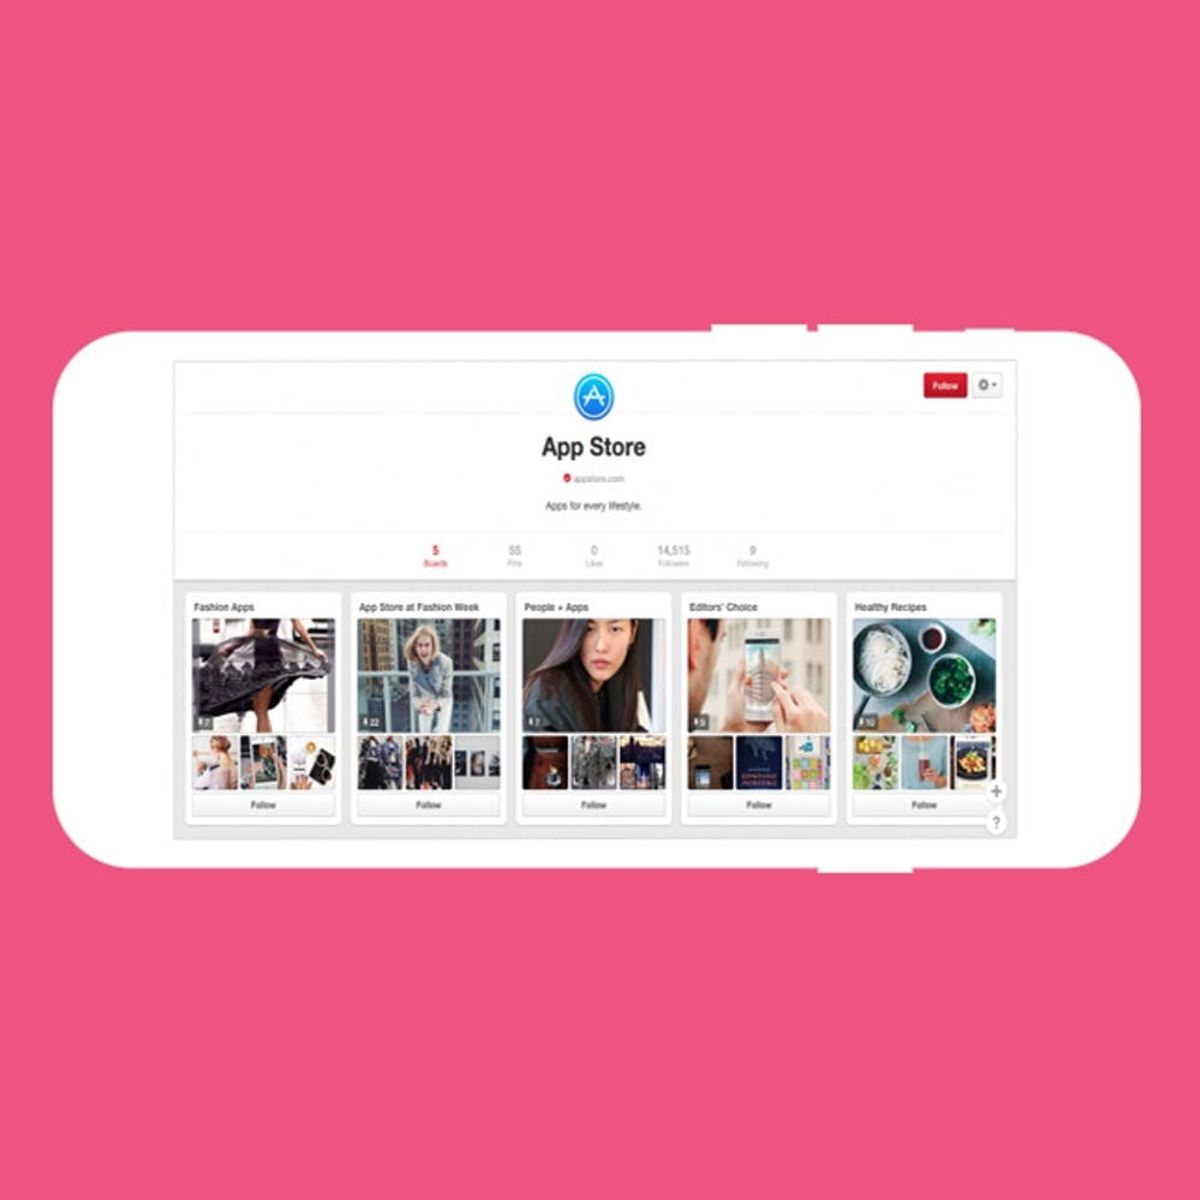 2 New Pinterest Updates You Need to Know About